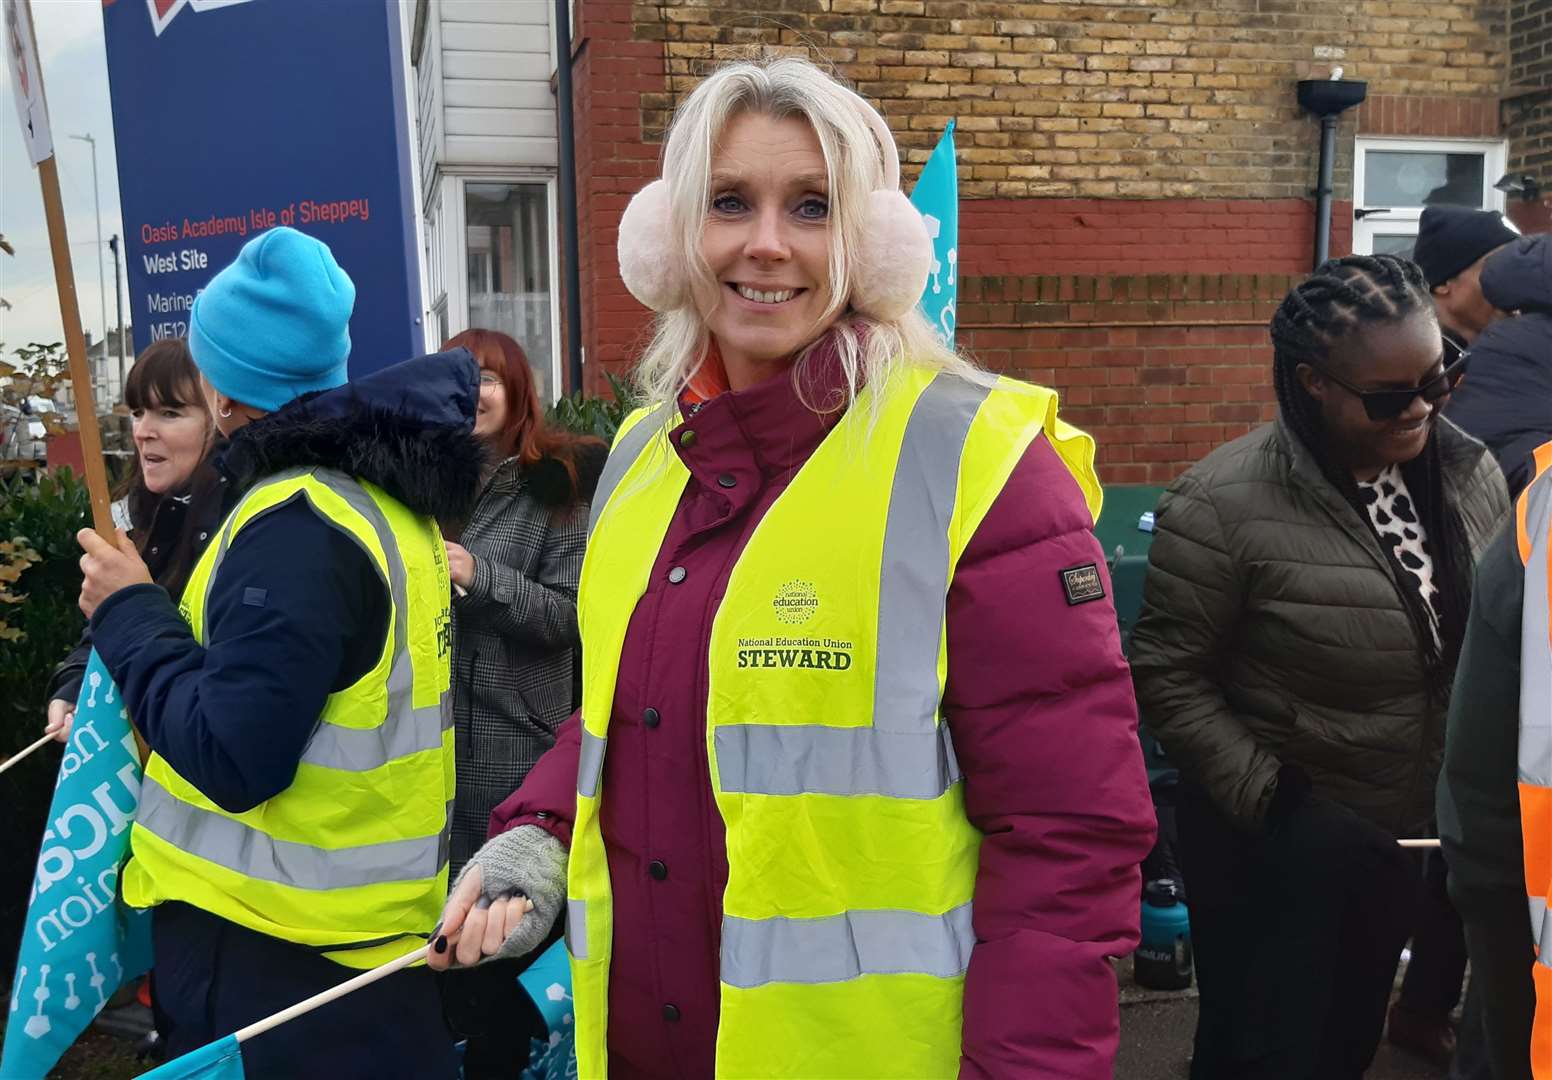 Teacher Claire joined protests outside Oasis Academy on Sheppey this morning